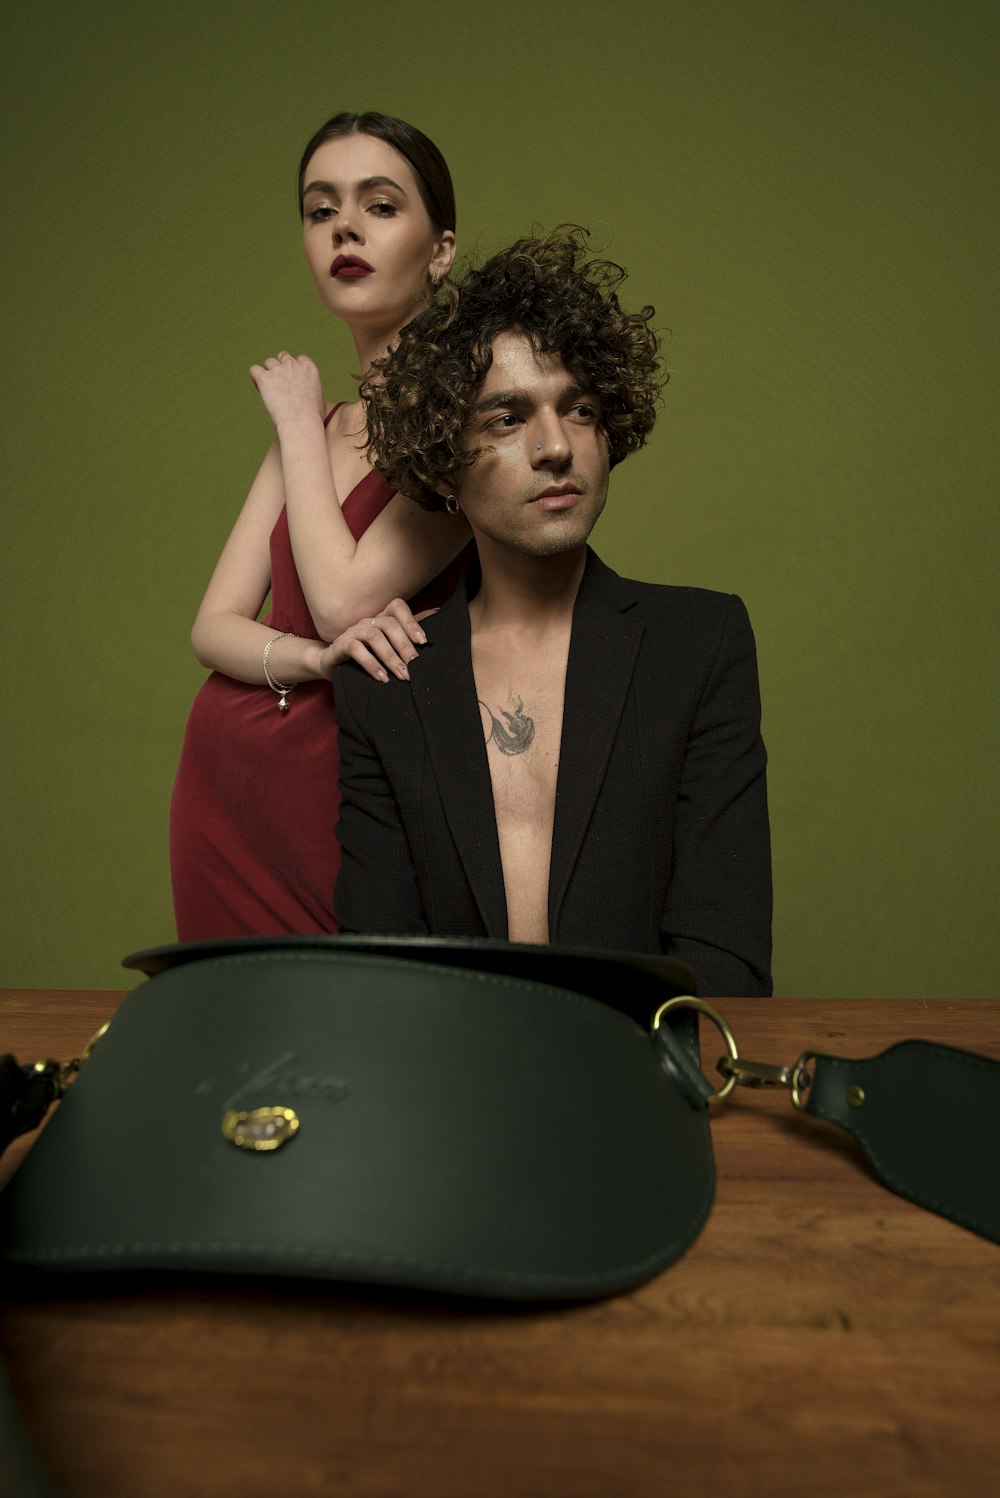 a man and a woman standing next to a purse